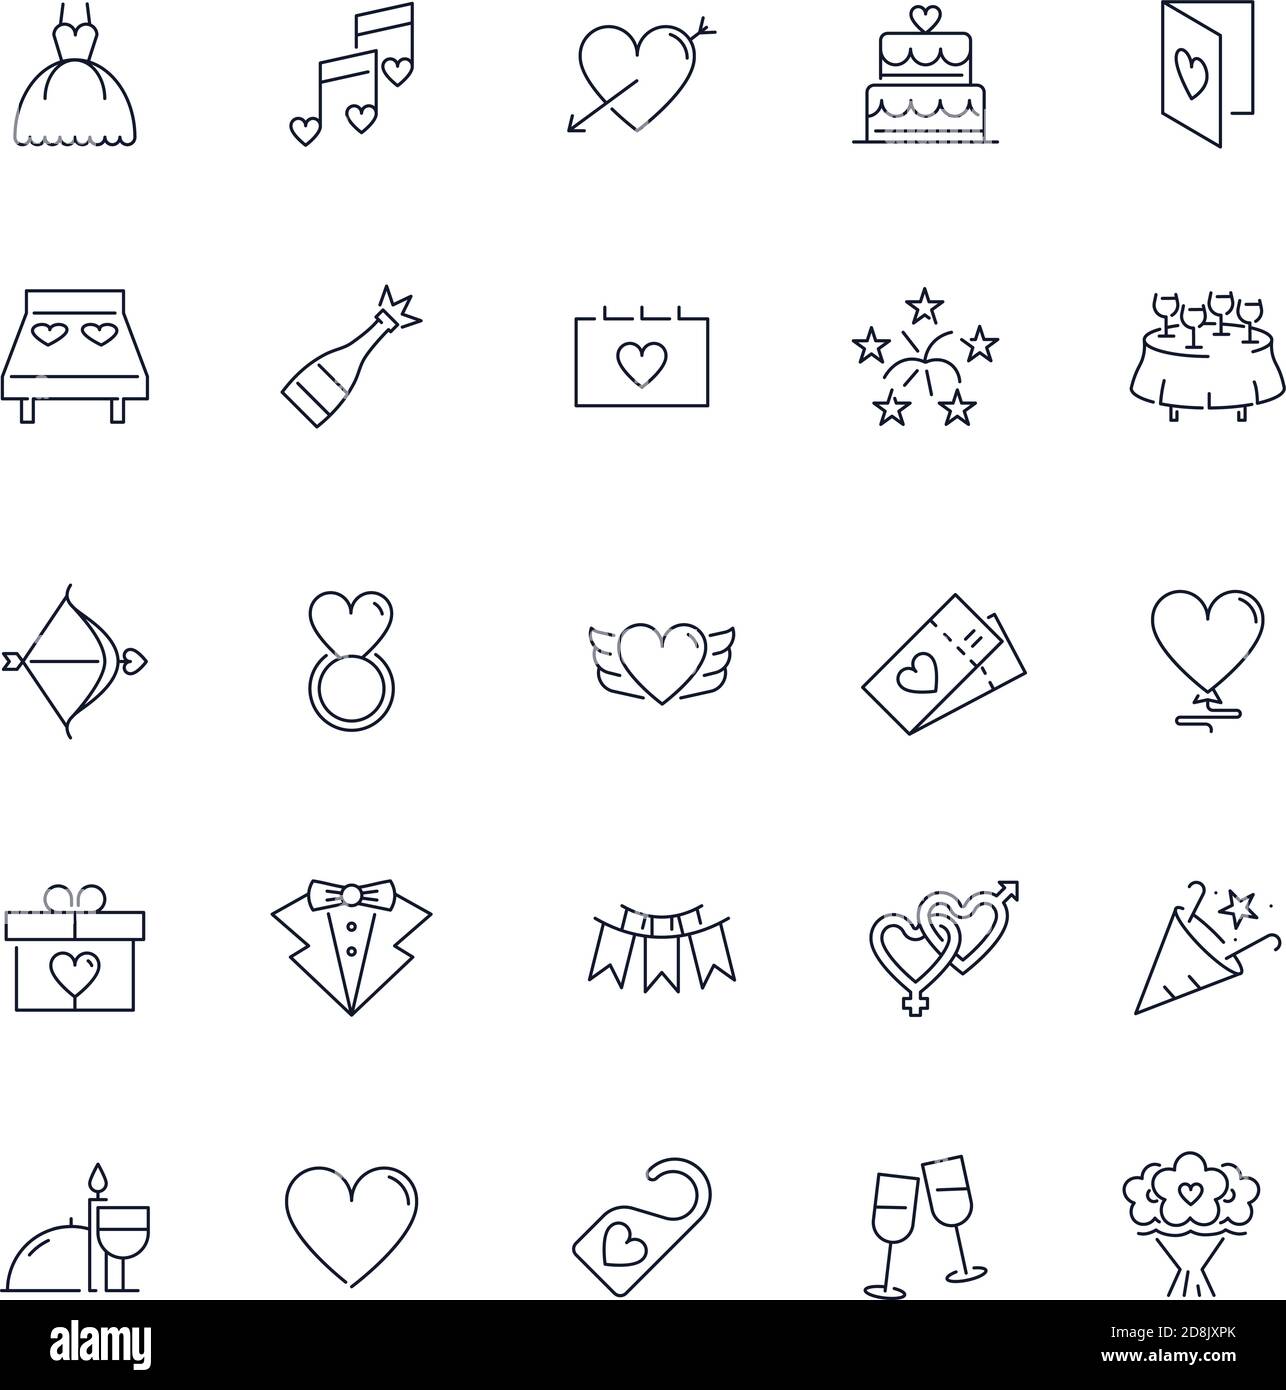 Line icons set. Wedding pack. Vector illustration Stock Vector Image ...